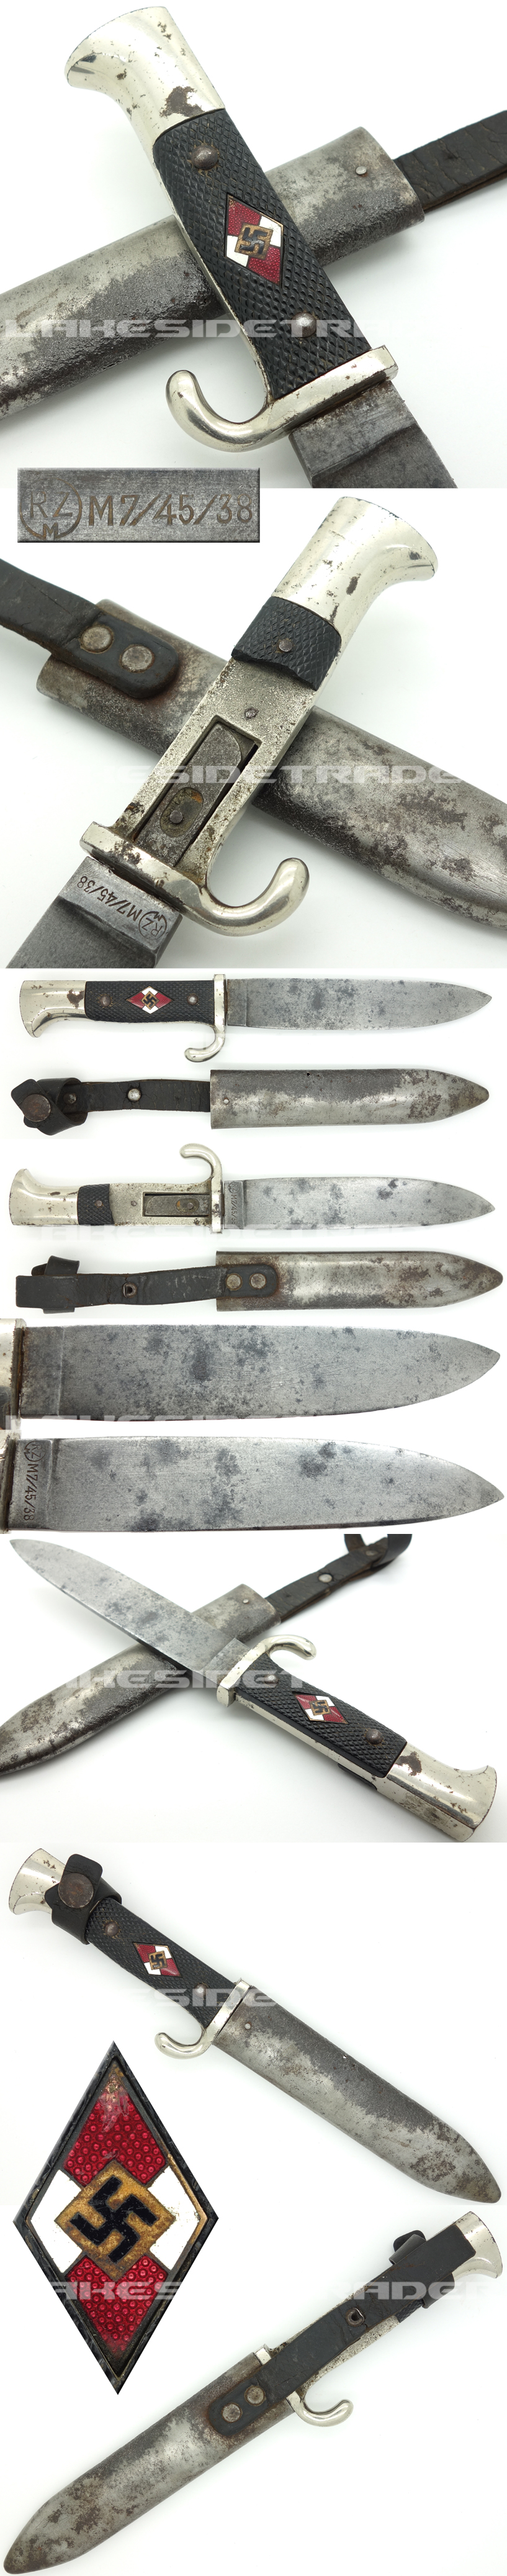 Hitler Youth Knife by RZM M7/45 1938